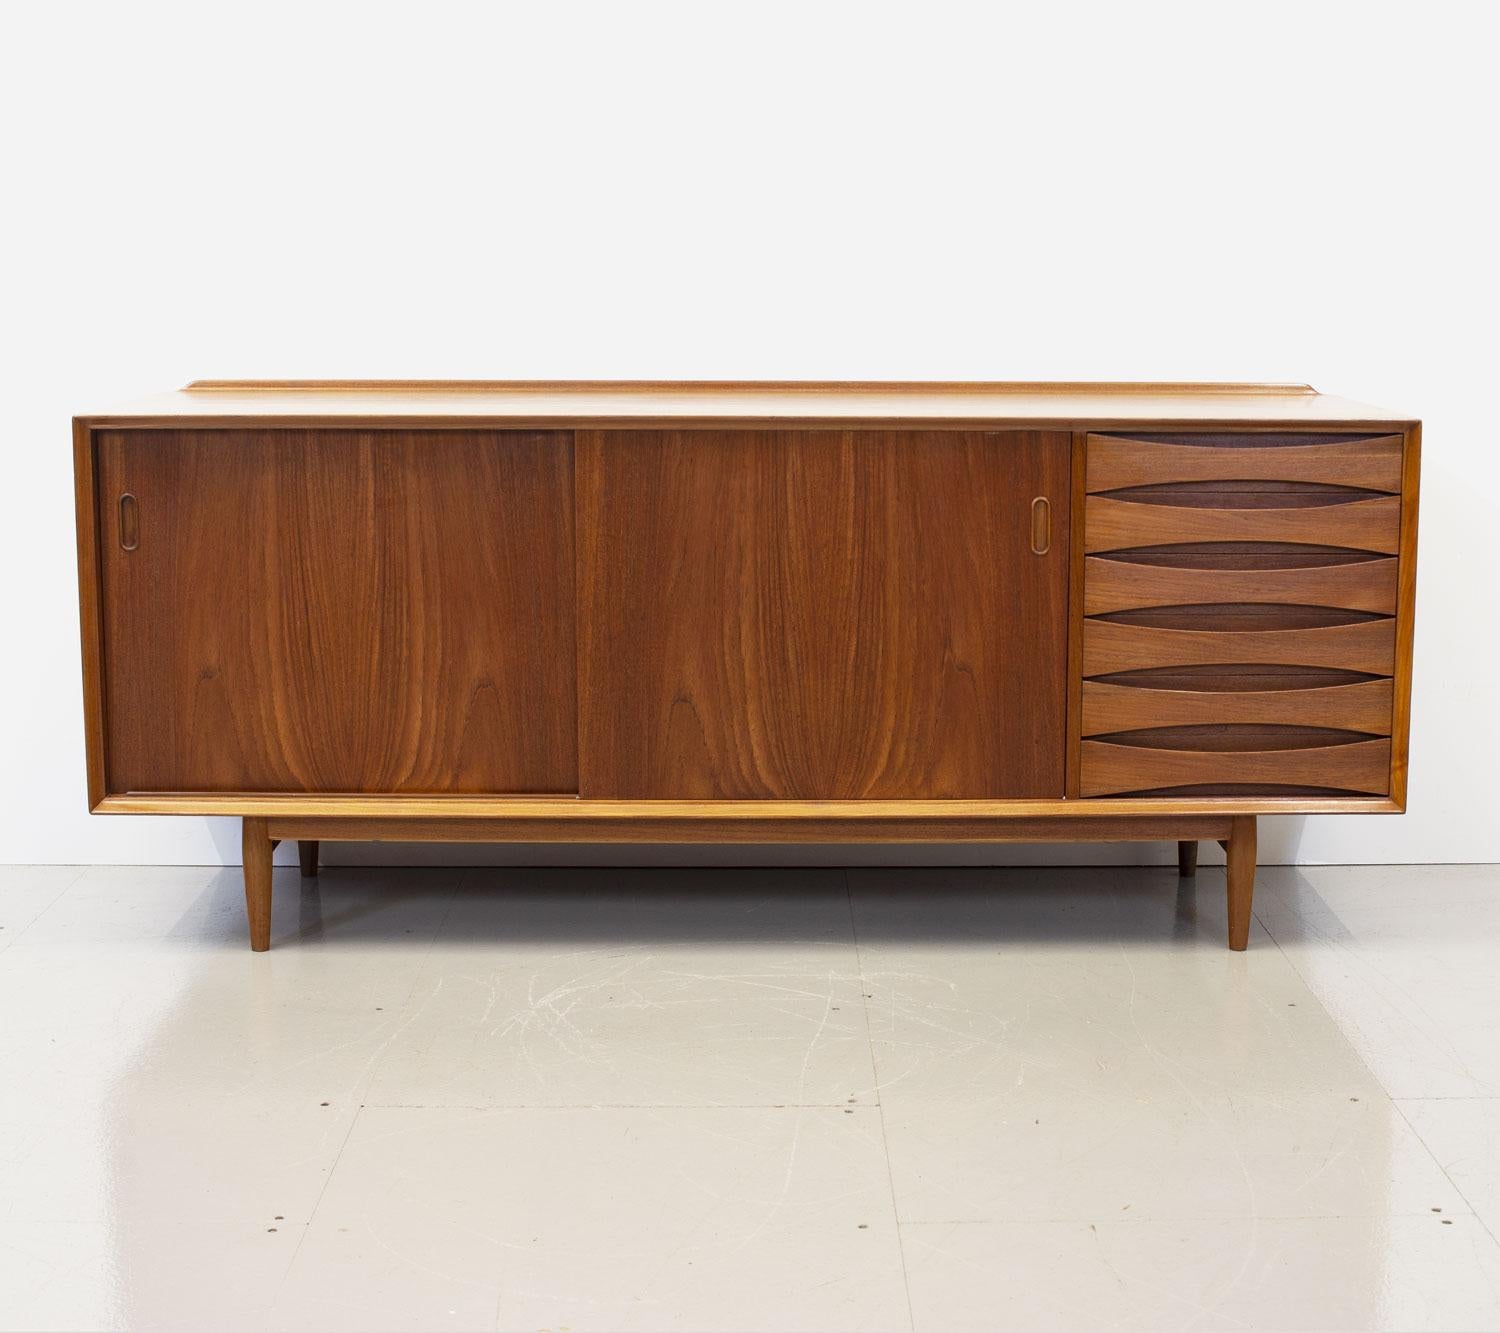 Teak model OS29 sideboard by Arne Vodder for Sibast. Designed in the late 1950s it is now an iconic piece of Danish furniture, known for it’s distinctive and much copied bow tie fronted drawers and reversible doors, it was part of his award winning